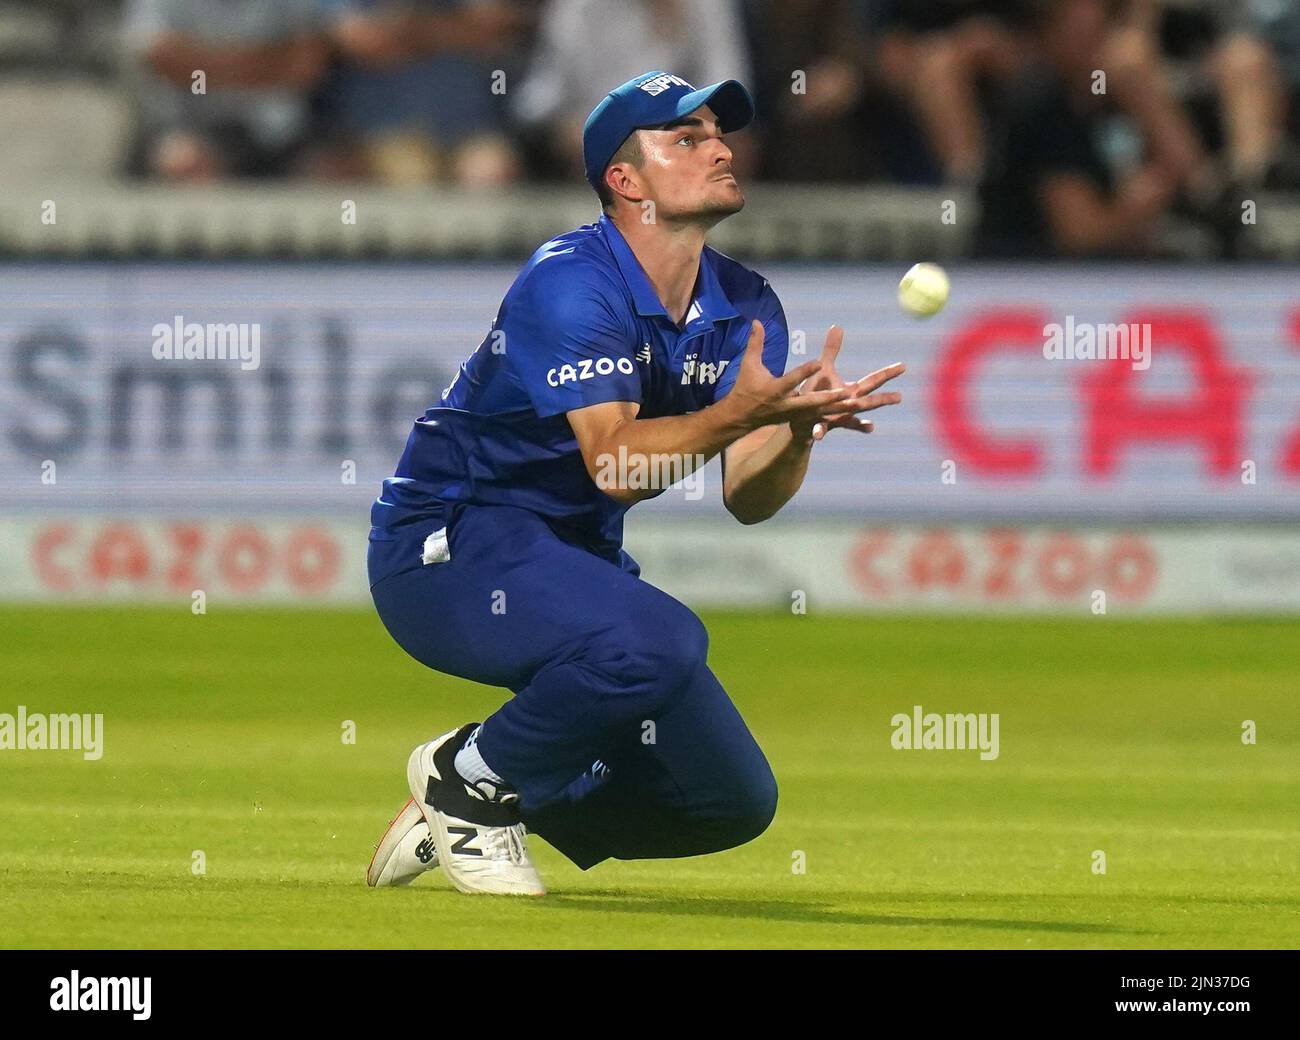 London Spirit's Jordan Thompson drops a catch during The Hundred match at Lord's, London. Picture date: Monday August 8, 2022. Stock Photo